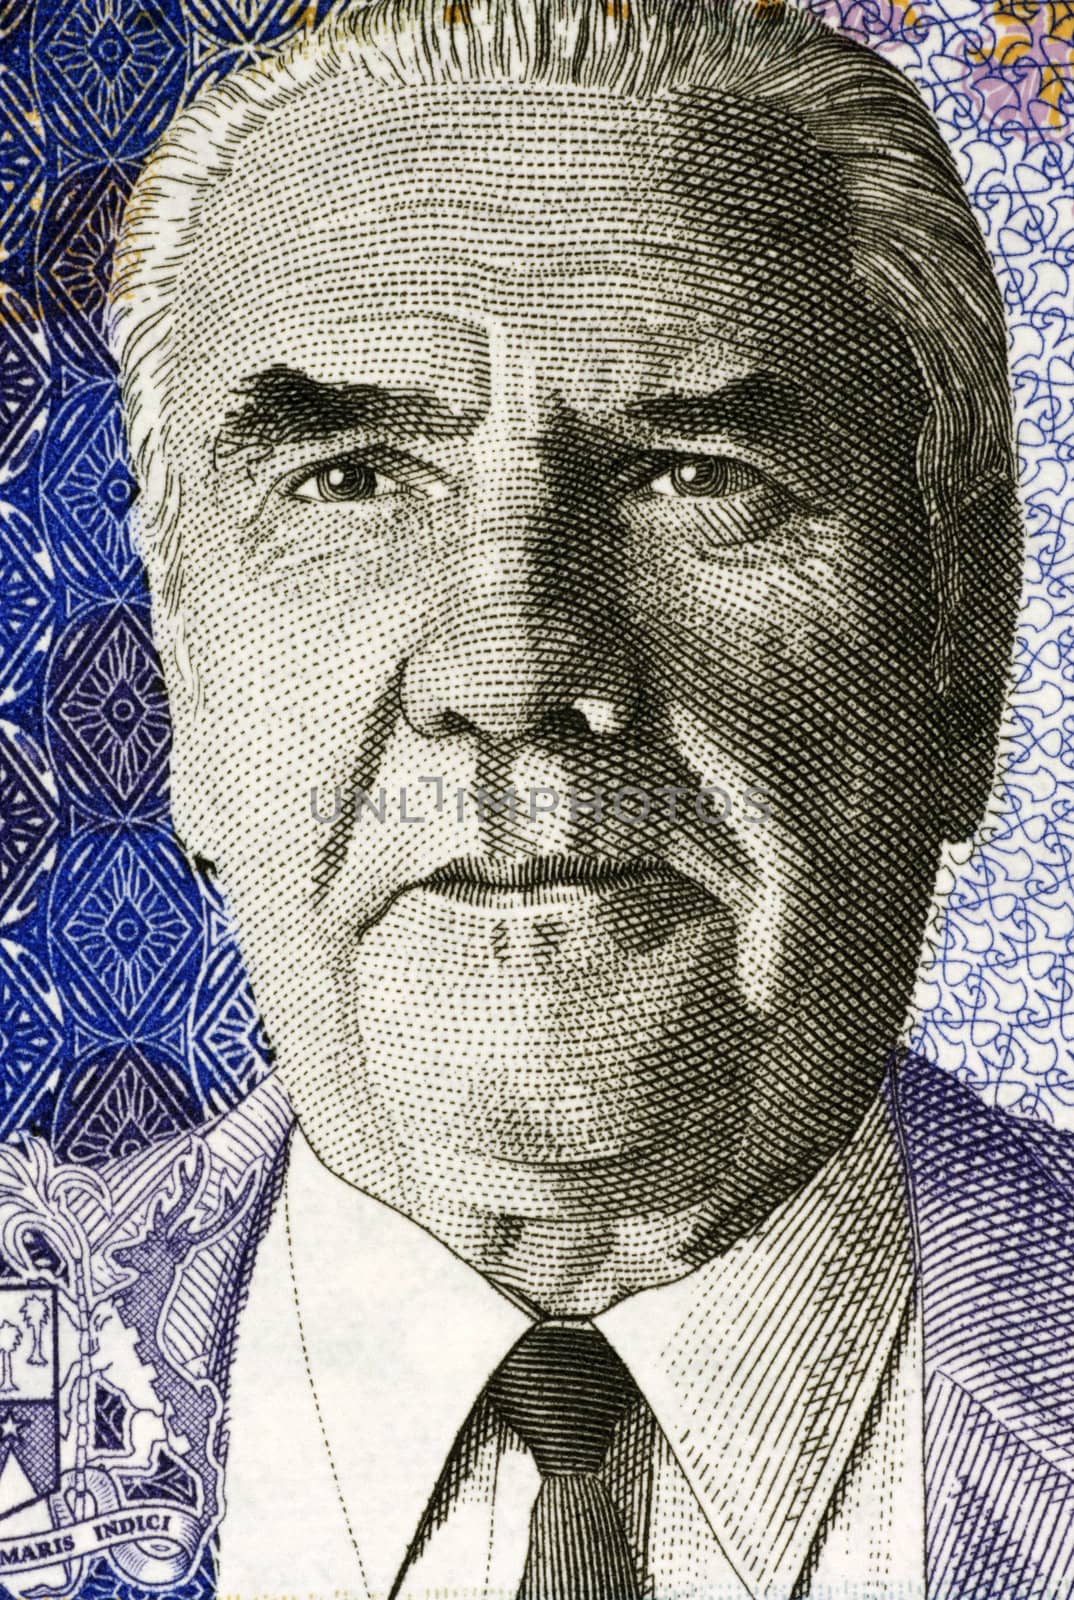 Joseph Maurice Paturau on 50 Rupees 2009 Banknote from Mauritius.